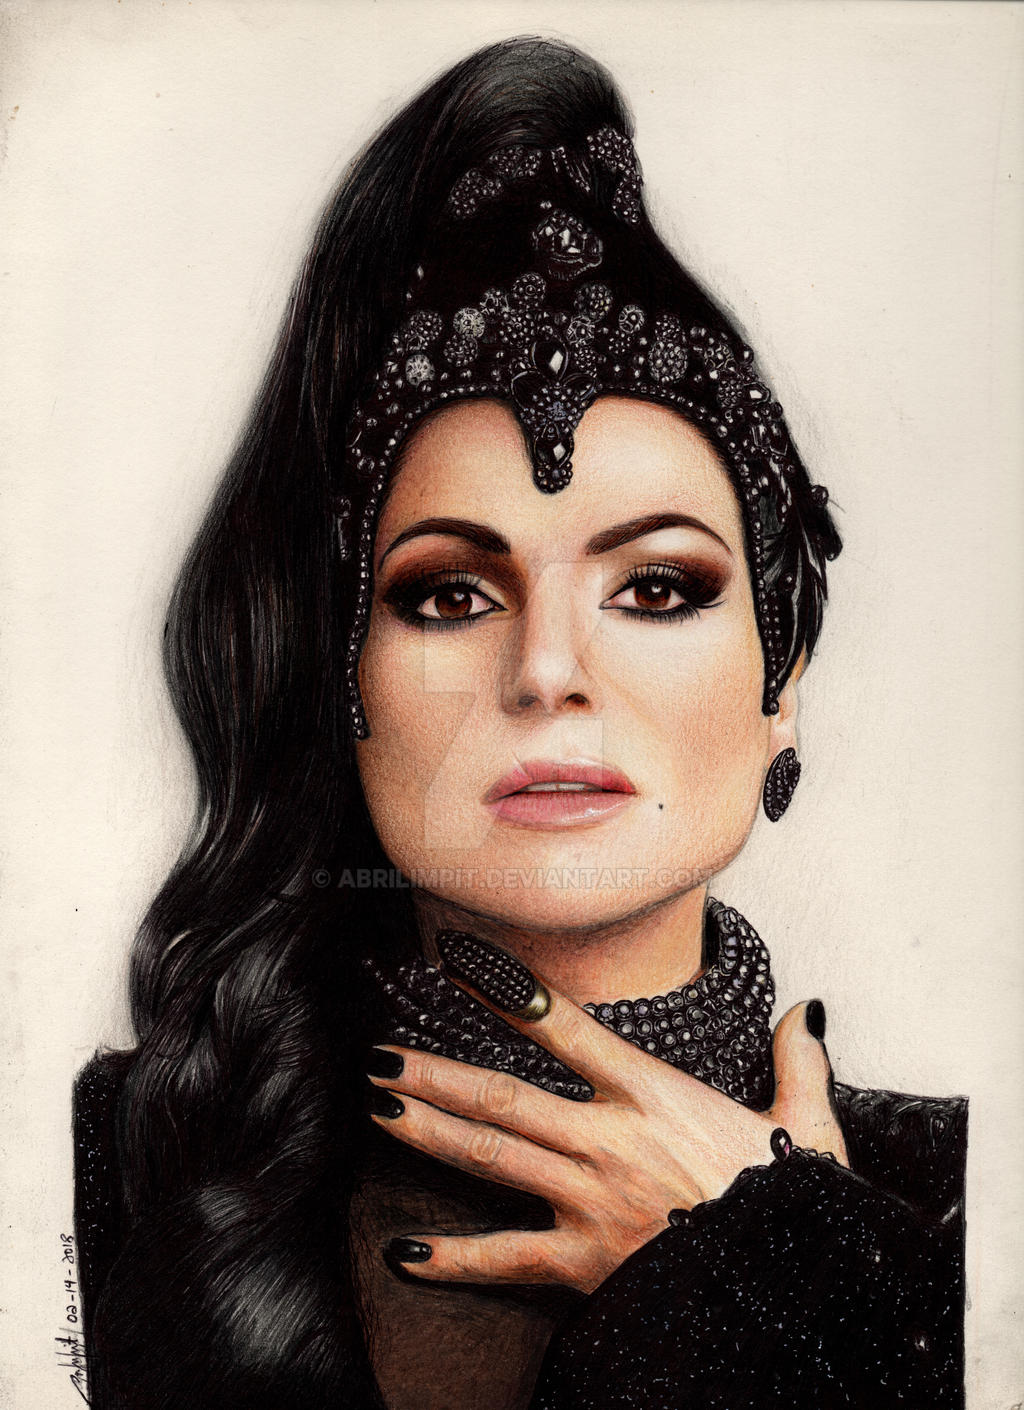 Long Live The EvilQueen